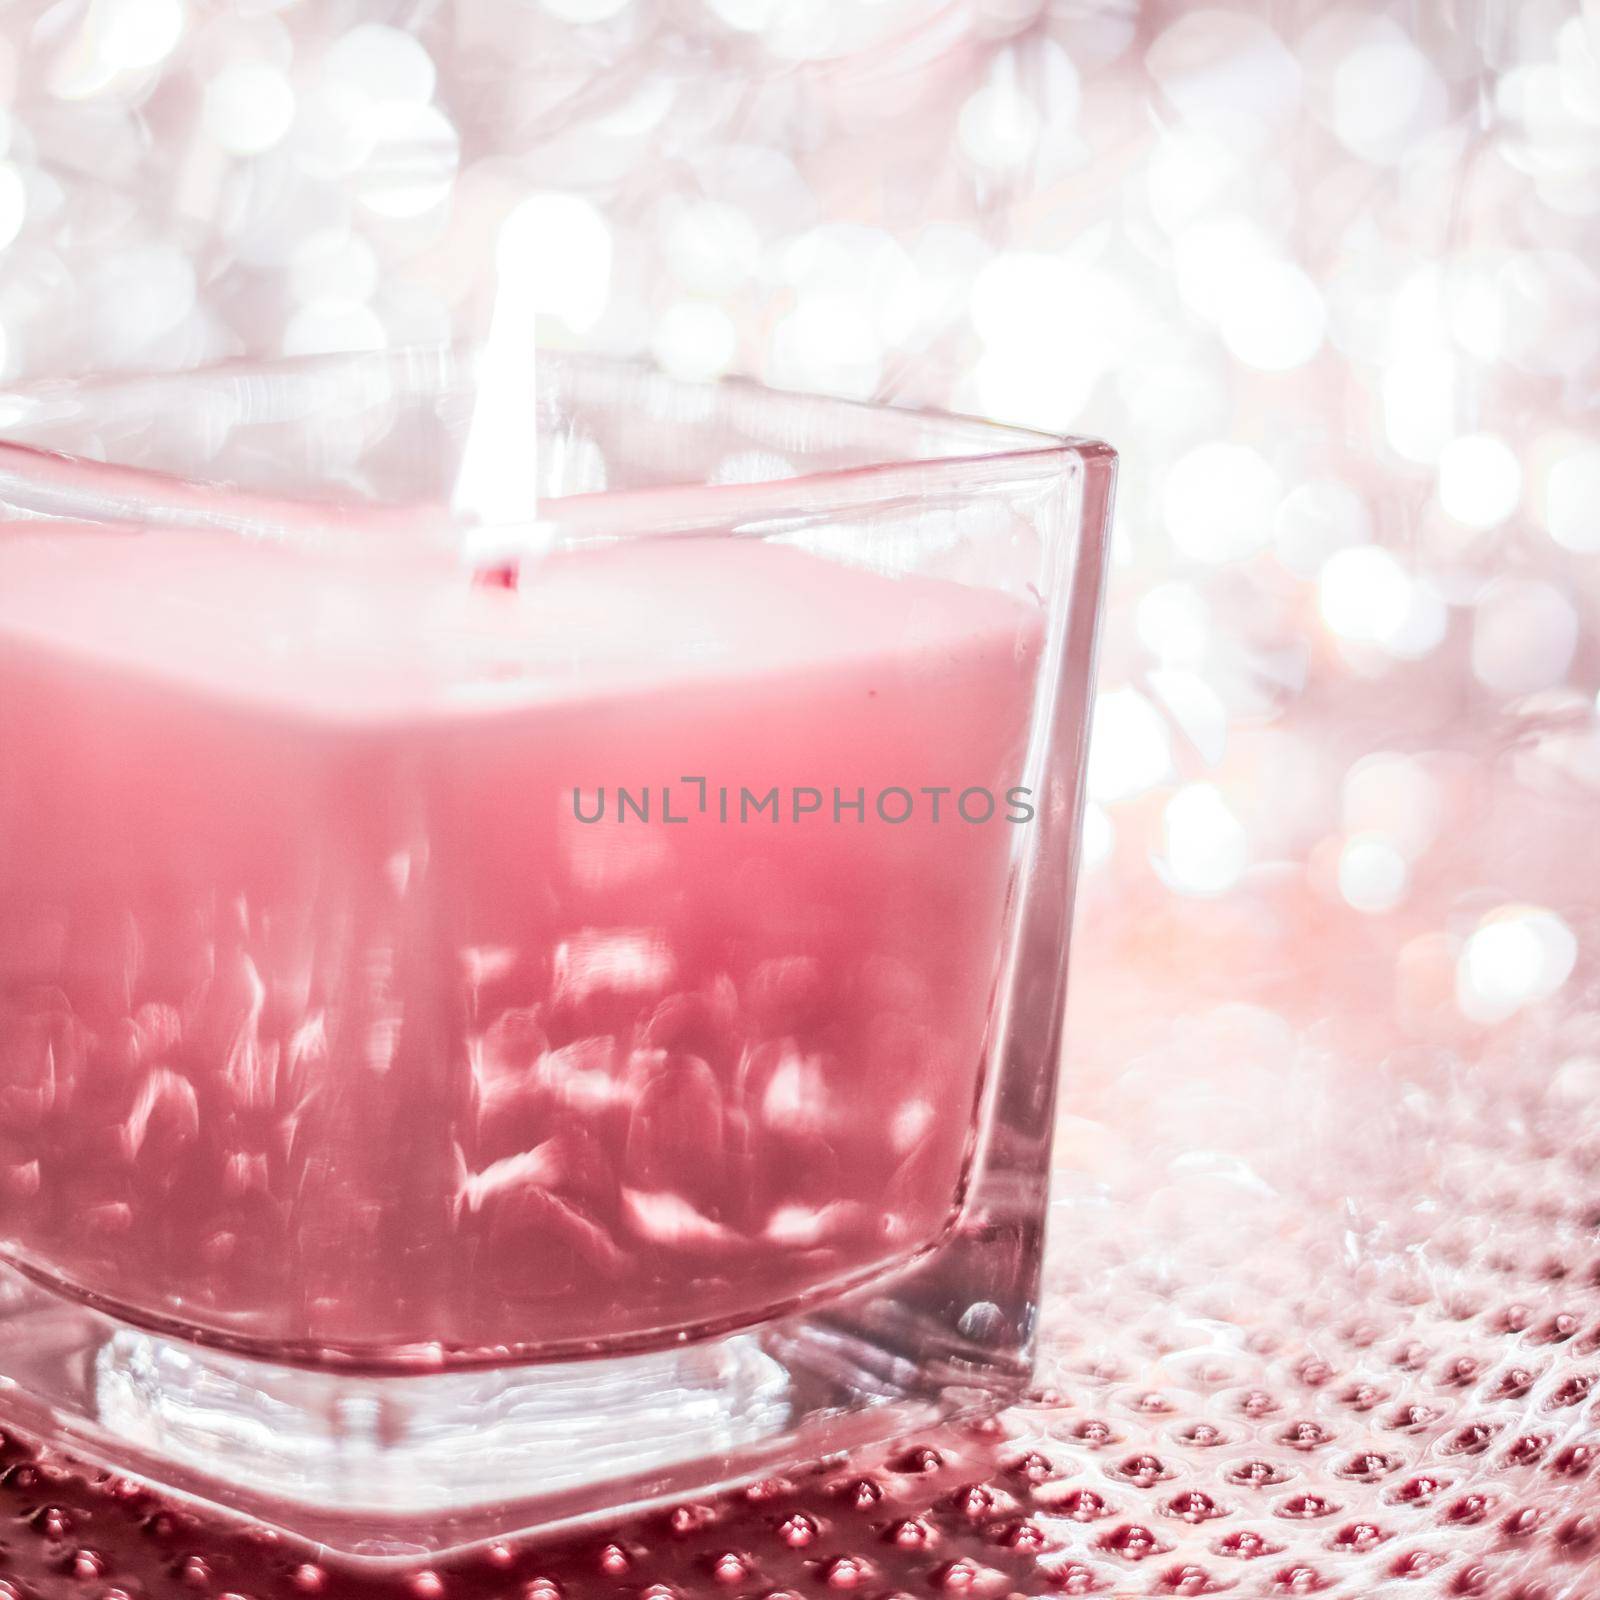 Festive decoration, branding and aromatherapy spa concept - Rose aromatic candle on Christmas and New Years glitter background, Valentines Day luxury home decor and holiday season brand design